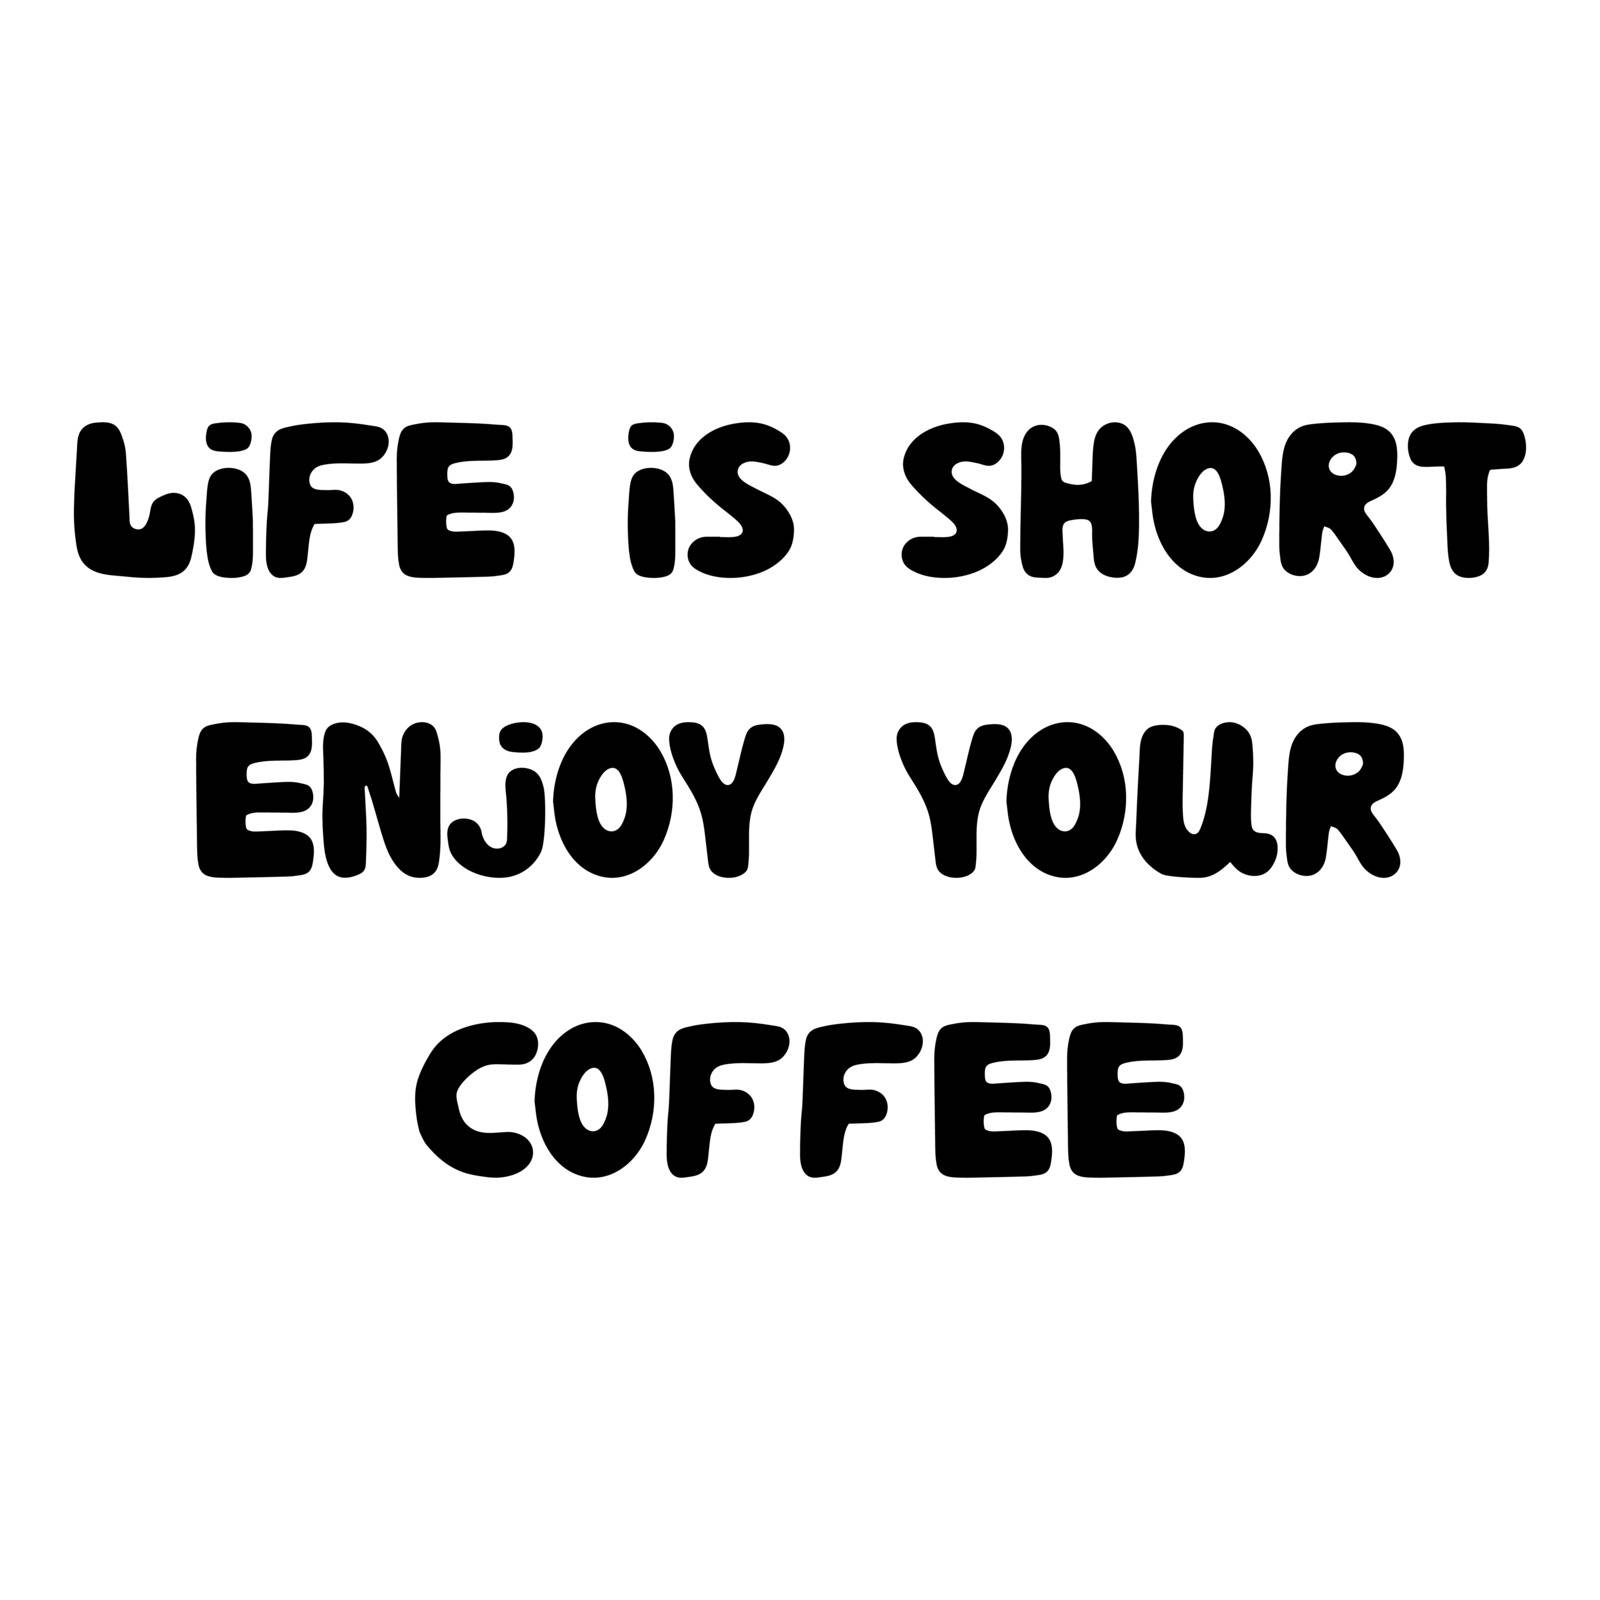 Life is short enjoy your coffee. Hand drawn bauble lettering. Vector stock illustration. by anna_artist